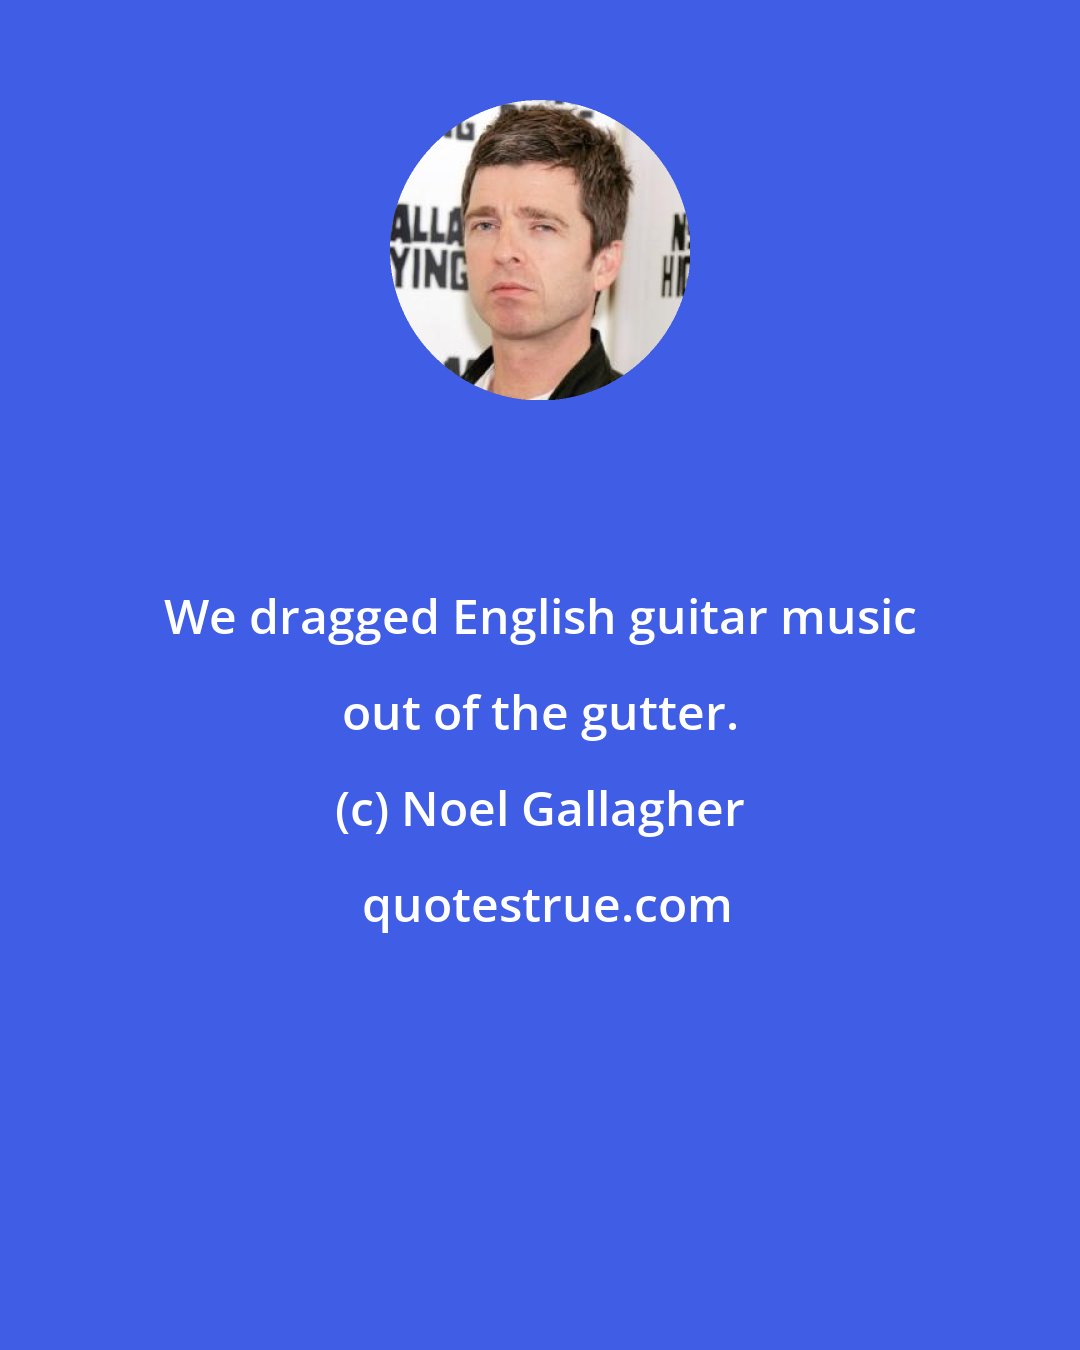 Noel Gallagher: We dragged English guitar music out of the gutter.